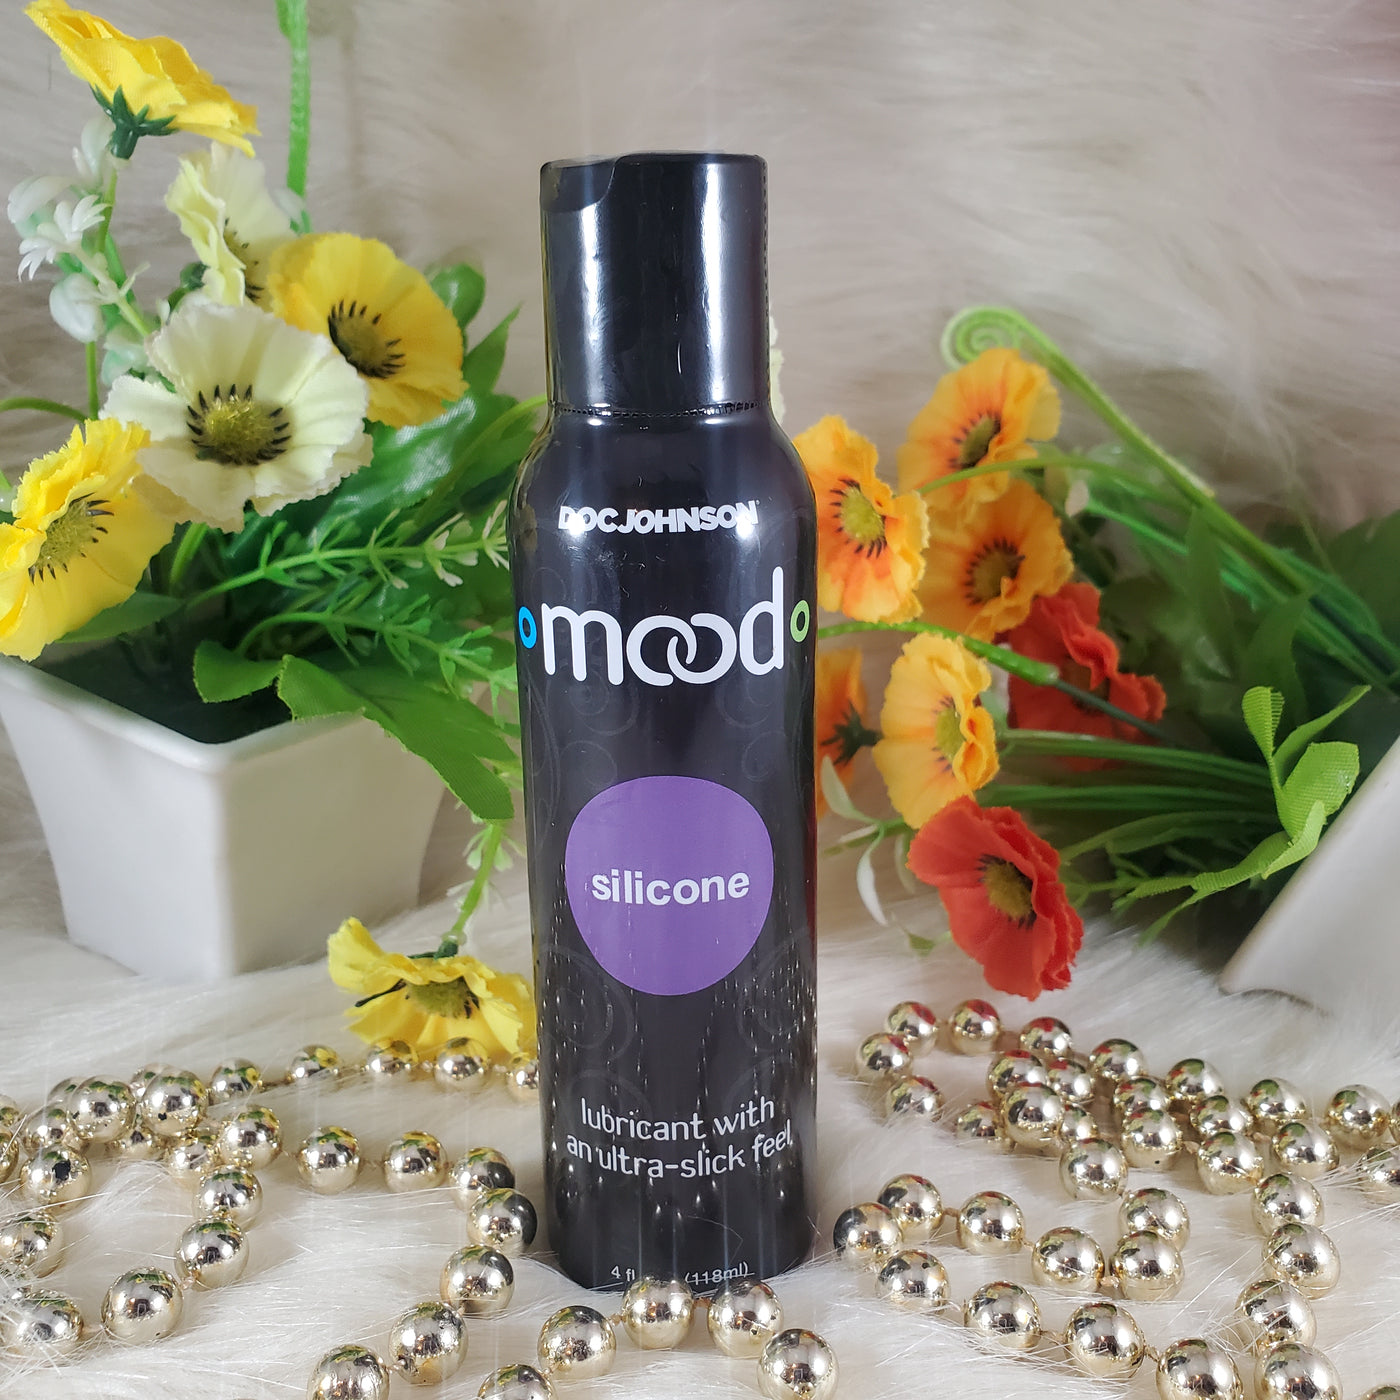 Mood Silicone Lube